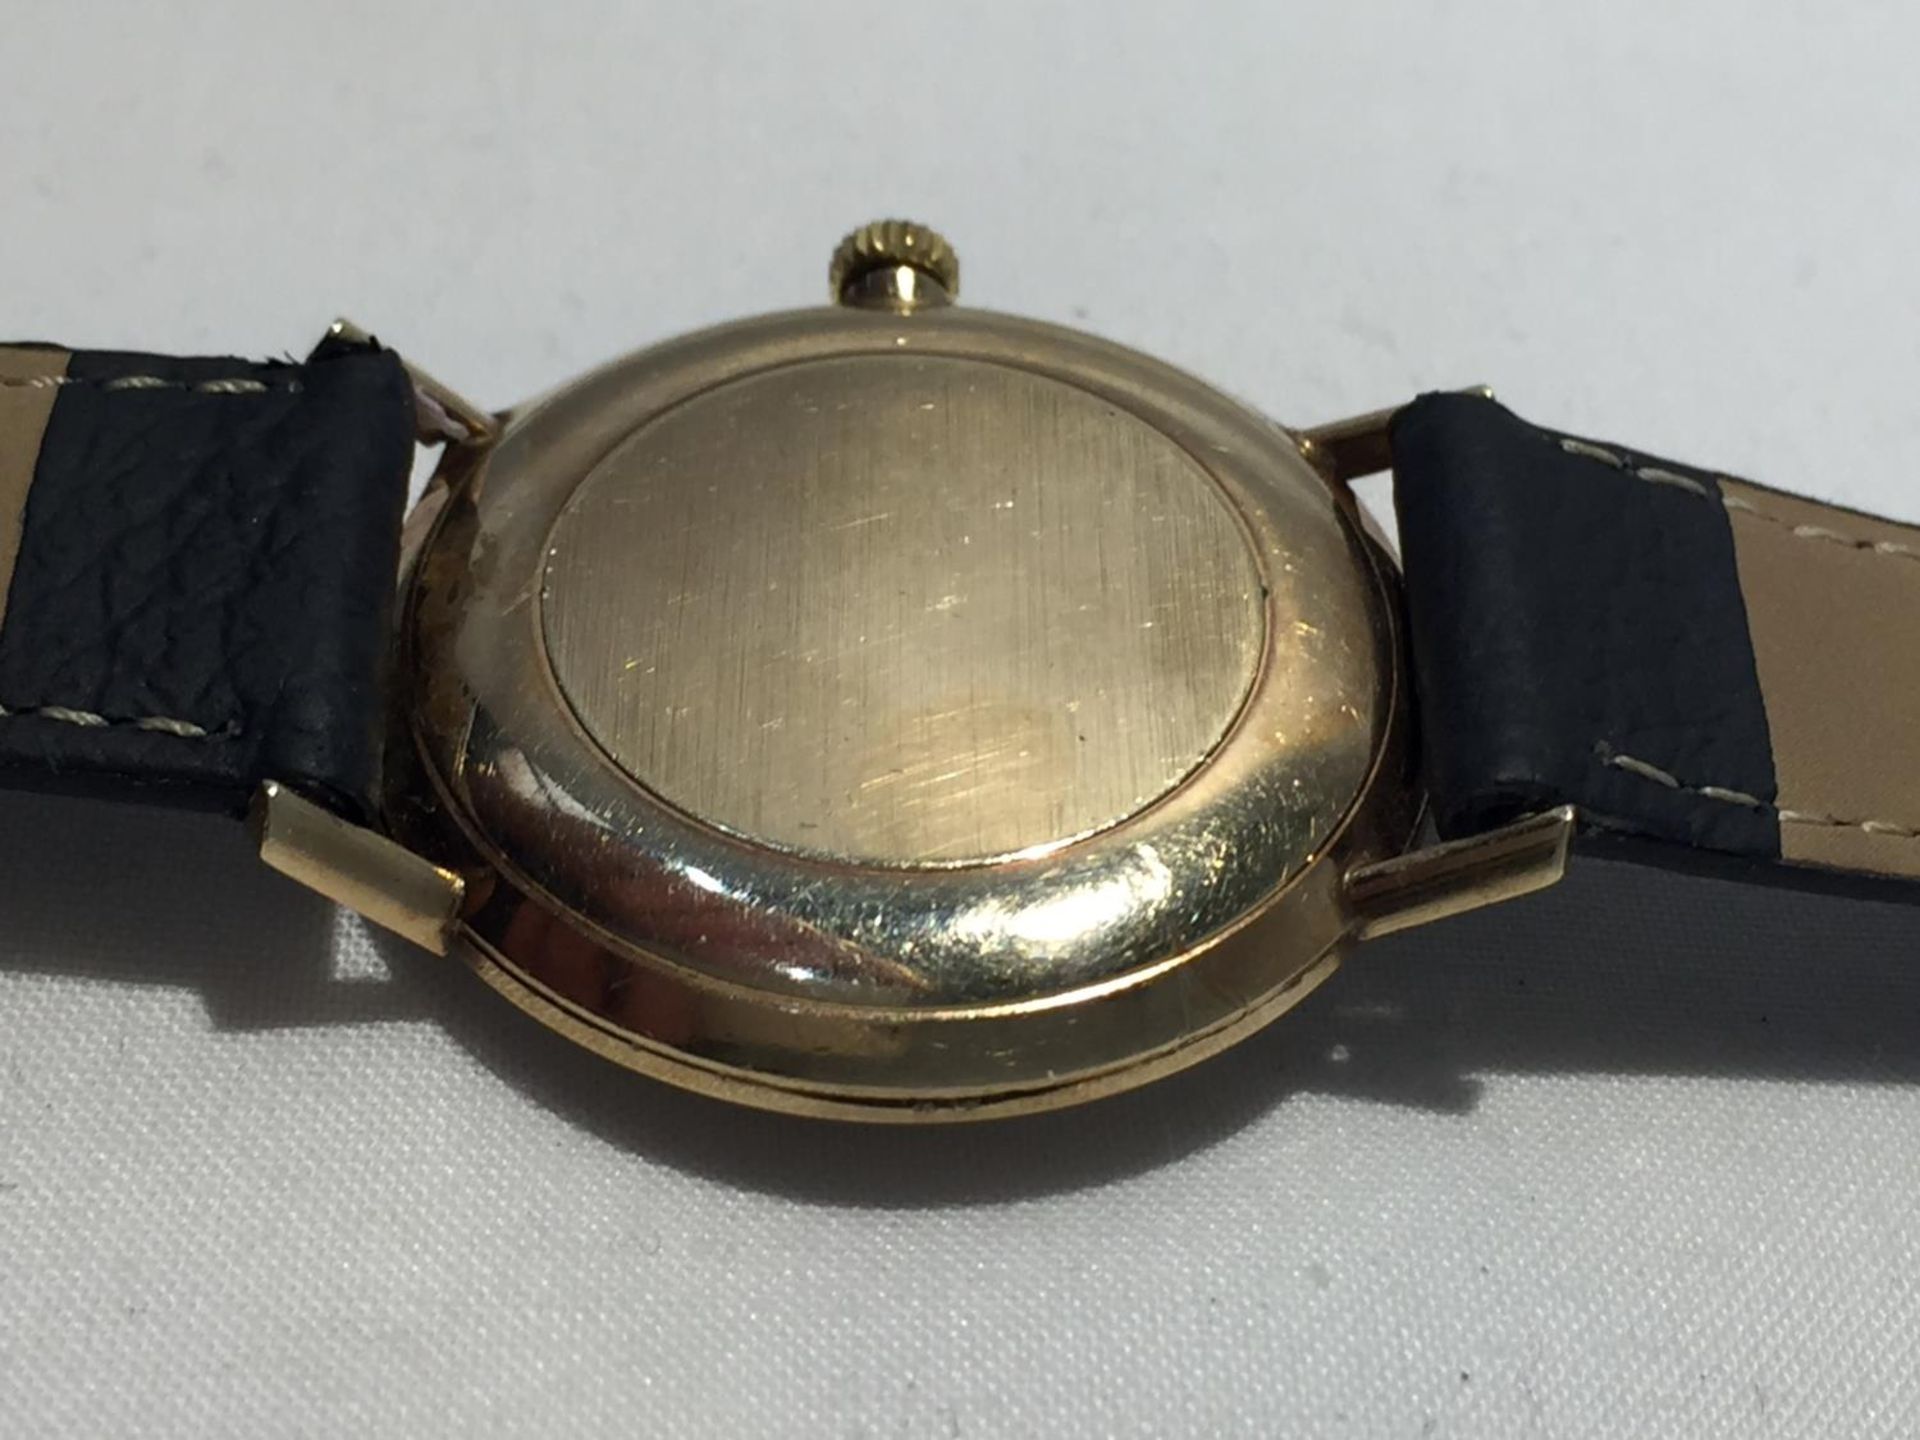 AN OMEGA GENTLEMAN'S WRIST WATCH WITH 9 CARAT GOLD CASE AND LEATHER STRAP - Image 6 of 9